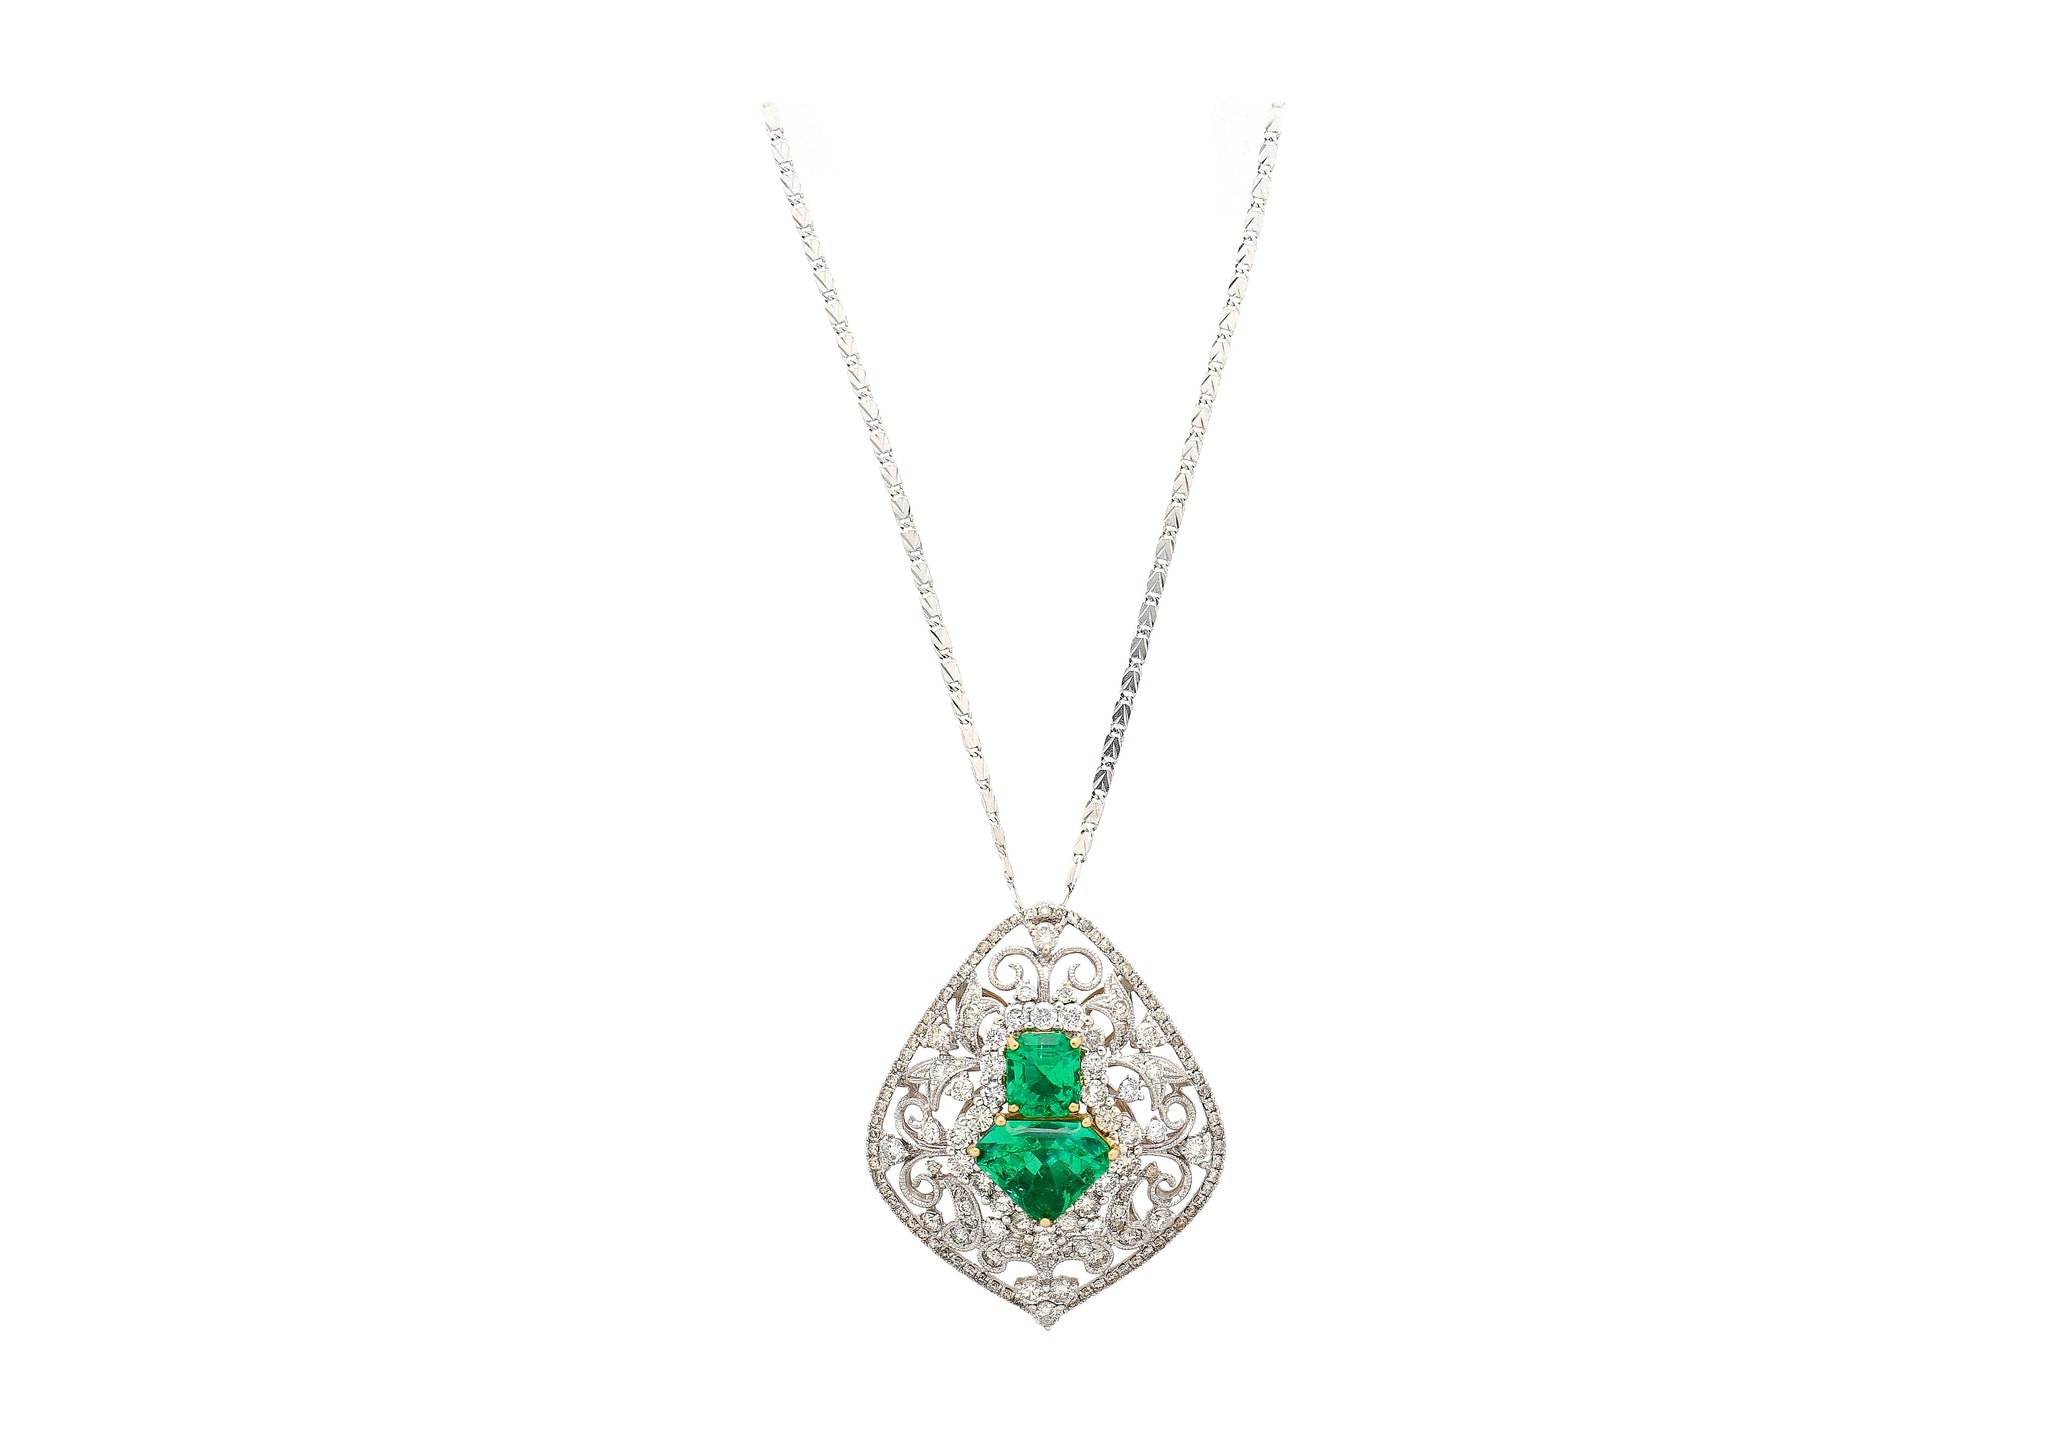 Vintage Art Nouveau Style Carved 18K White Gold Pendant Necklace With Shield Cut Emerald and Diamond Side Stones-Necklace-ASSAY